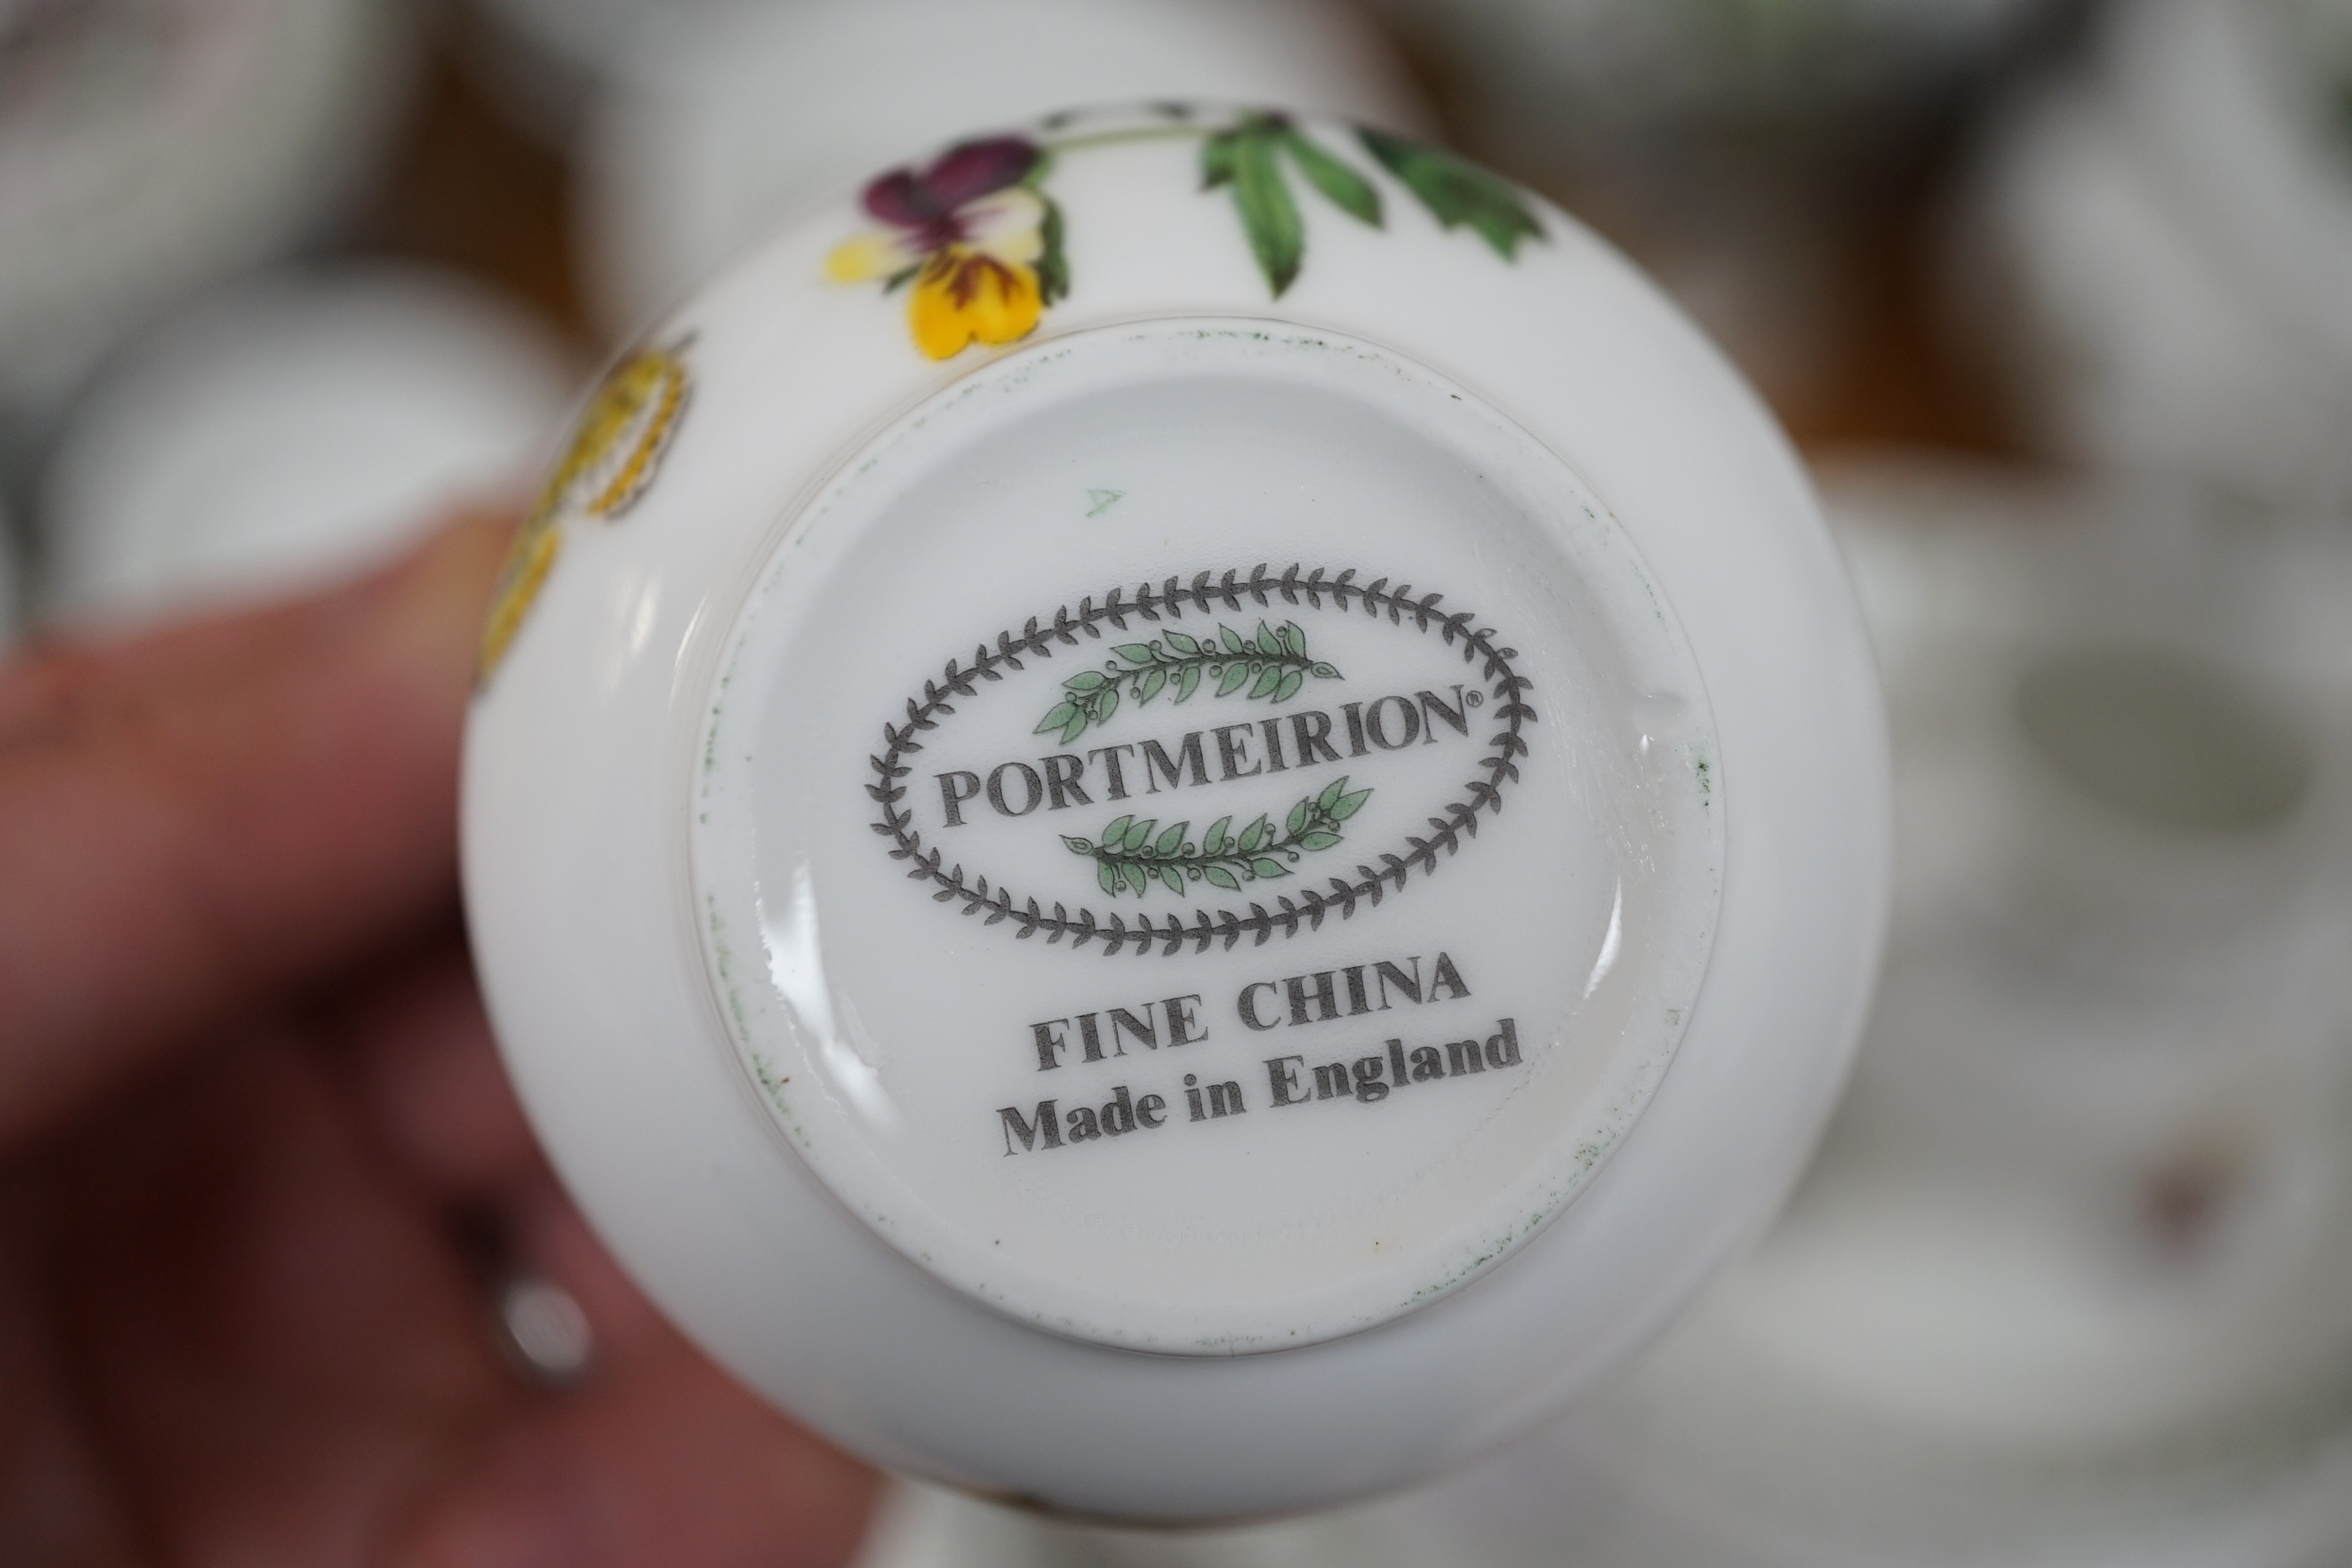 A large quantity of Portmeiron 'Botanical' pattern table ware